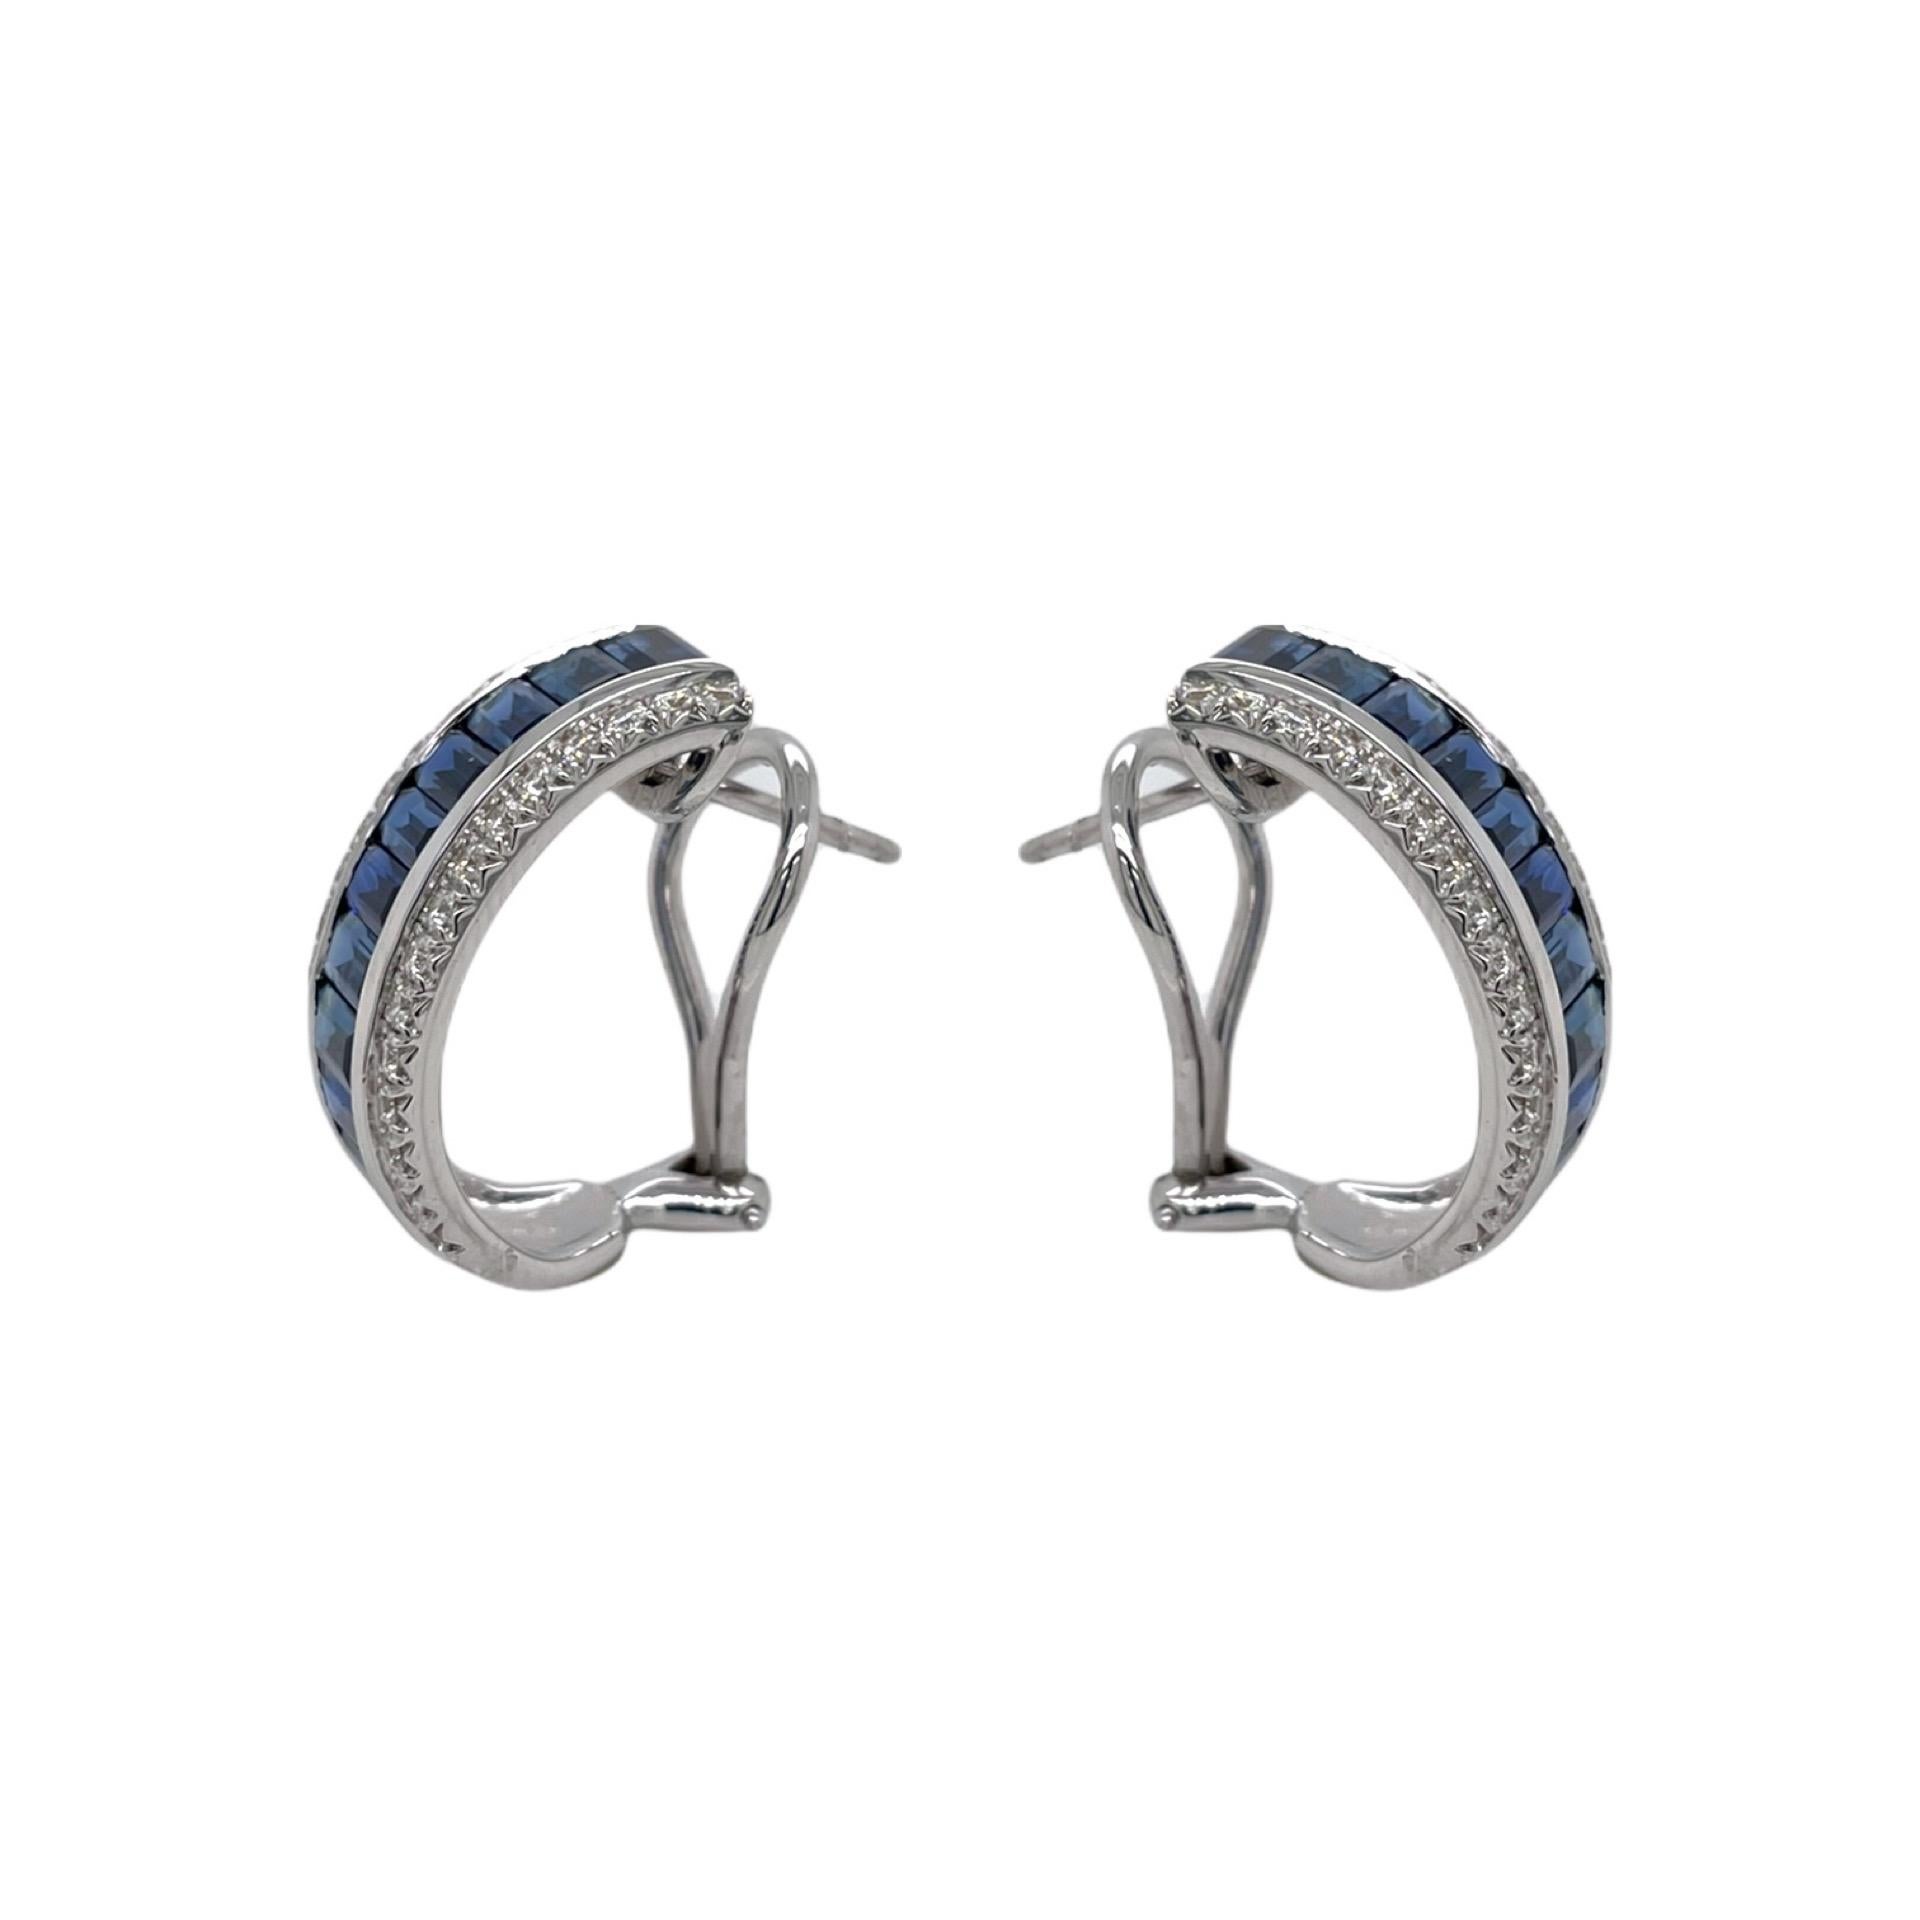 Earrings contain finely matched sapphire baguettes weighing 5.70tcw and round brilliant diamonds, 0.88tcw.
Diamonds are colorless and VS2 in clarity, excellent cut. Sapphires are mounted in a handmade channel setting and diamonds are set in a prong